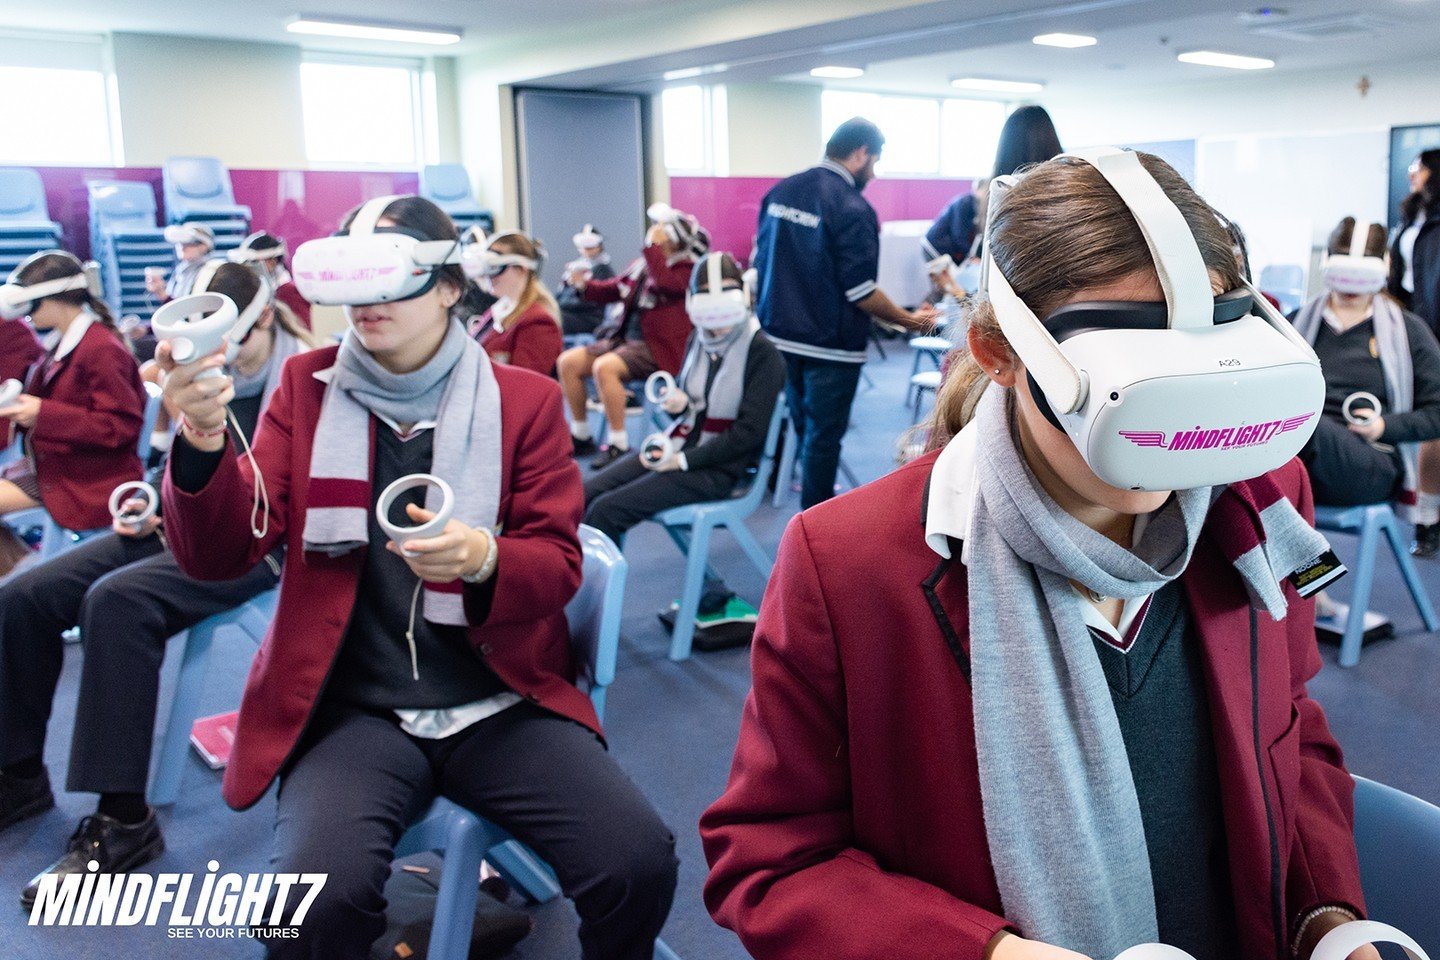 Exhibitor Spotlight ✨@mindflight7_au is Australia&rsquo;s largest educational Virtual Reality service provider. They harness immersive technology to provide career guidance and subject-specific learning experiences for school students. Through in-sch